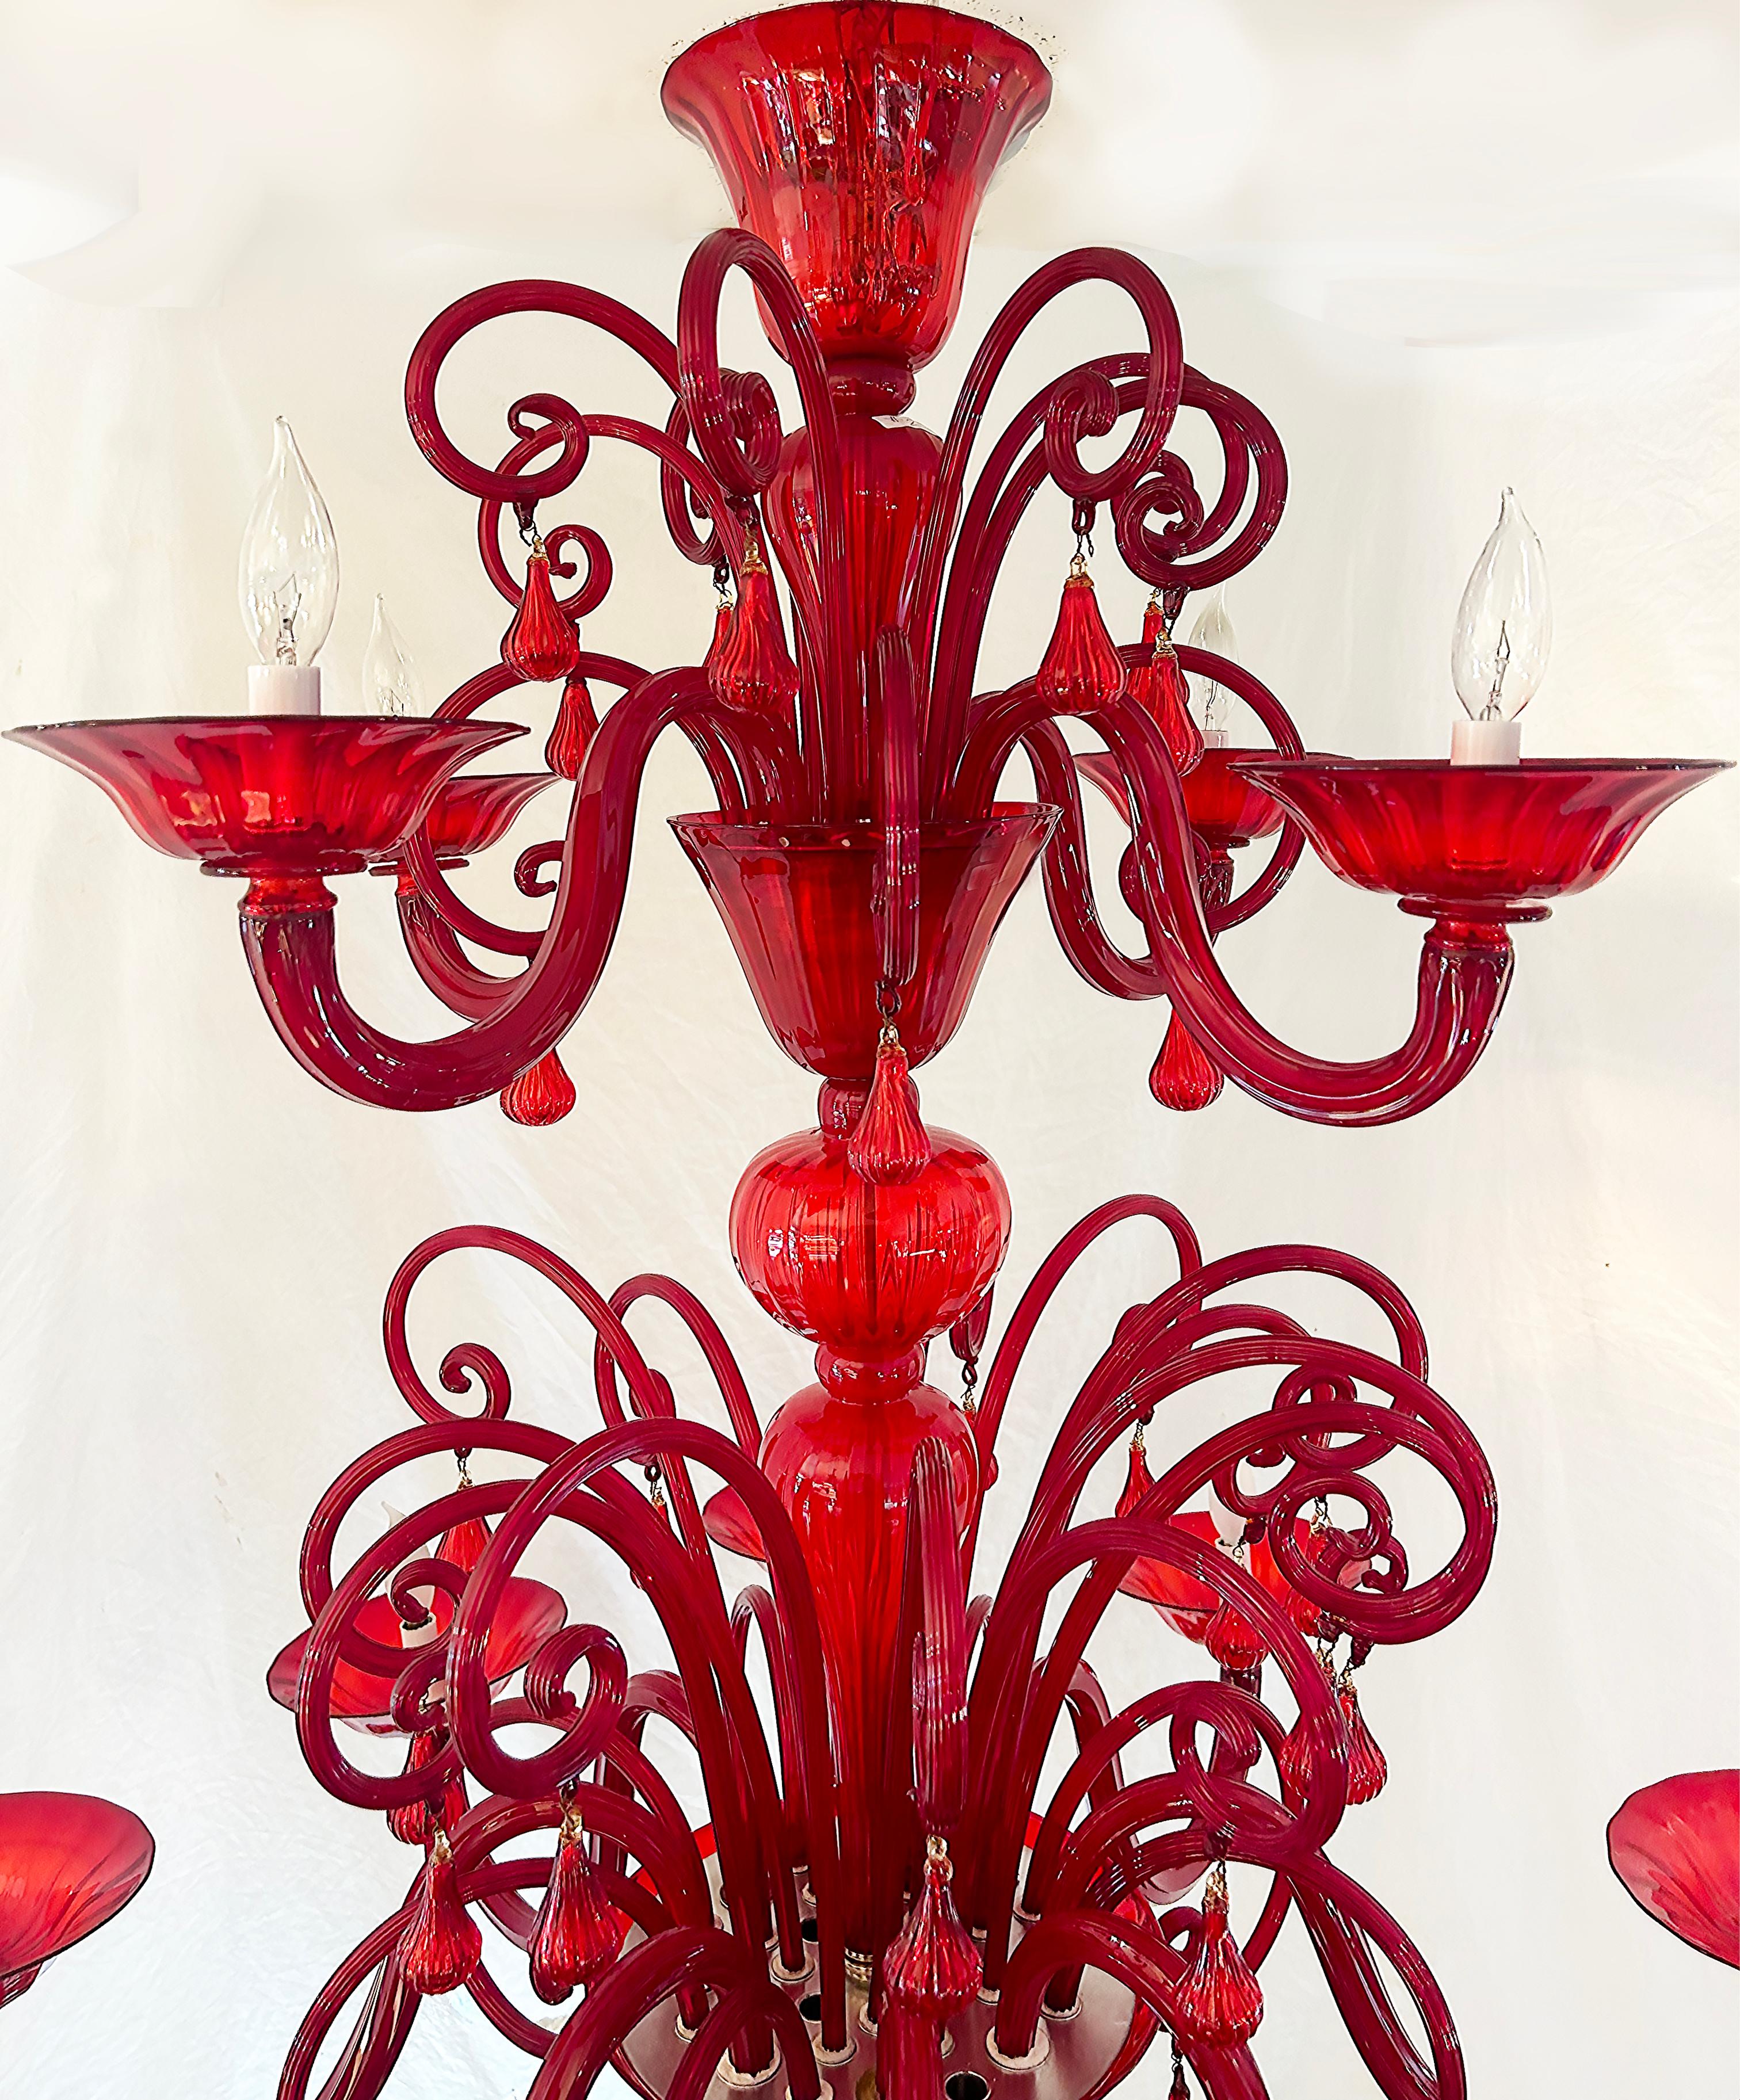 Monumental Red Murano Glass Two-Tiered 10 Light Chandelier.

Offered for sale is a very large ruby-red 10-light Murano glass chandelier from Italy. The chandelier is ornate with whimsical hand-blown balls and curls with decorative crystal drops